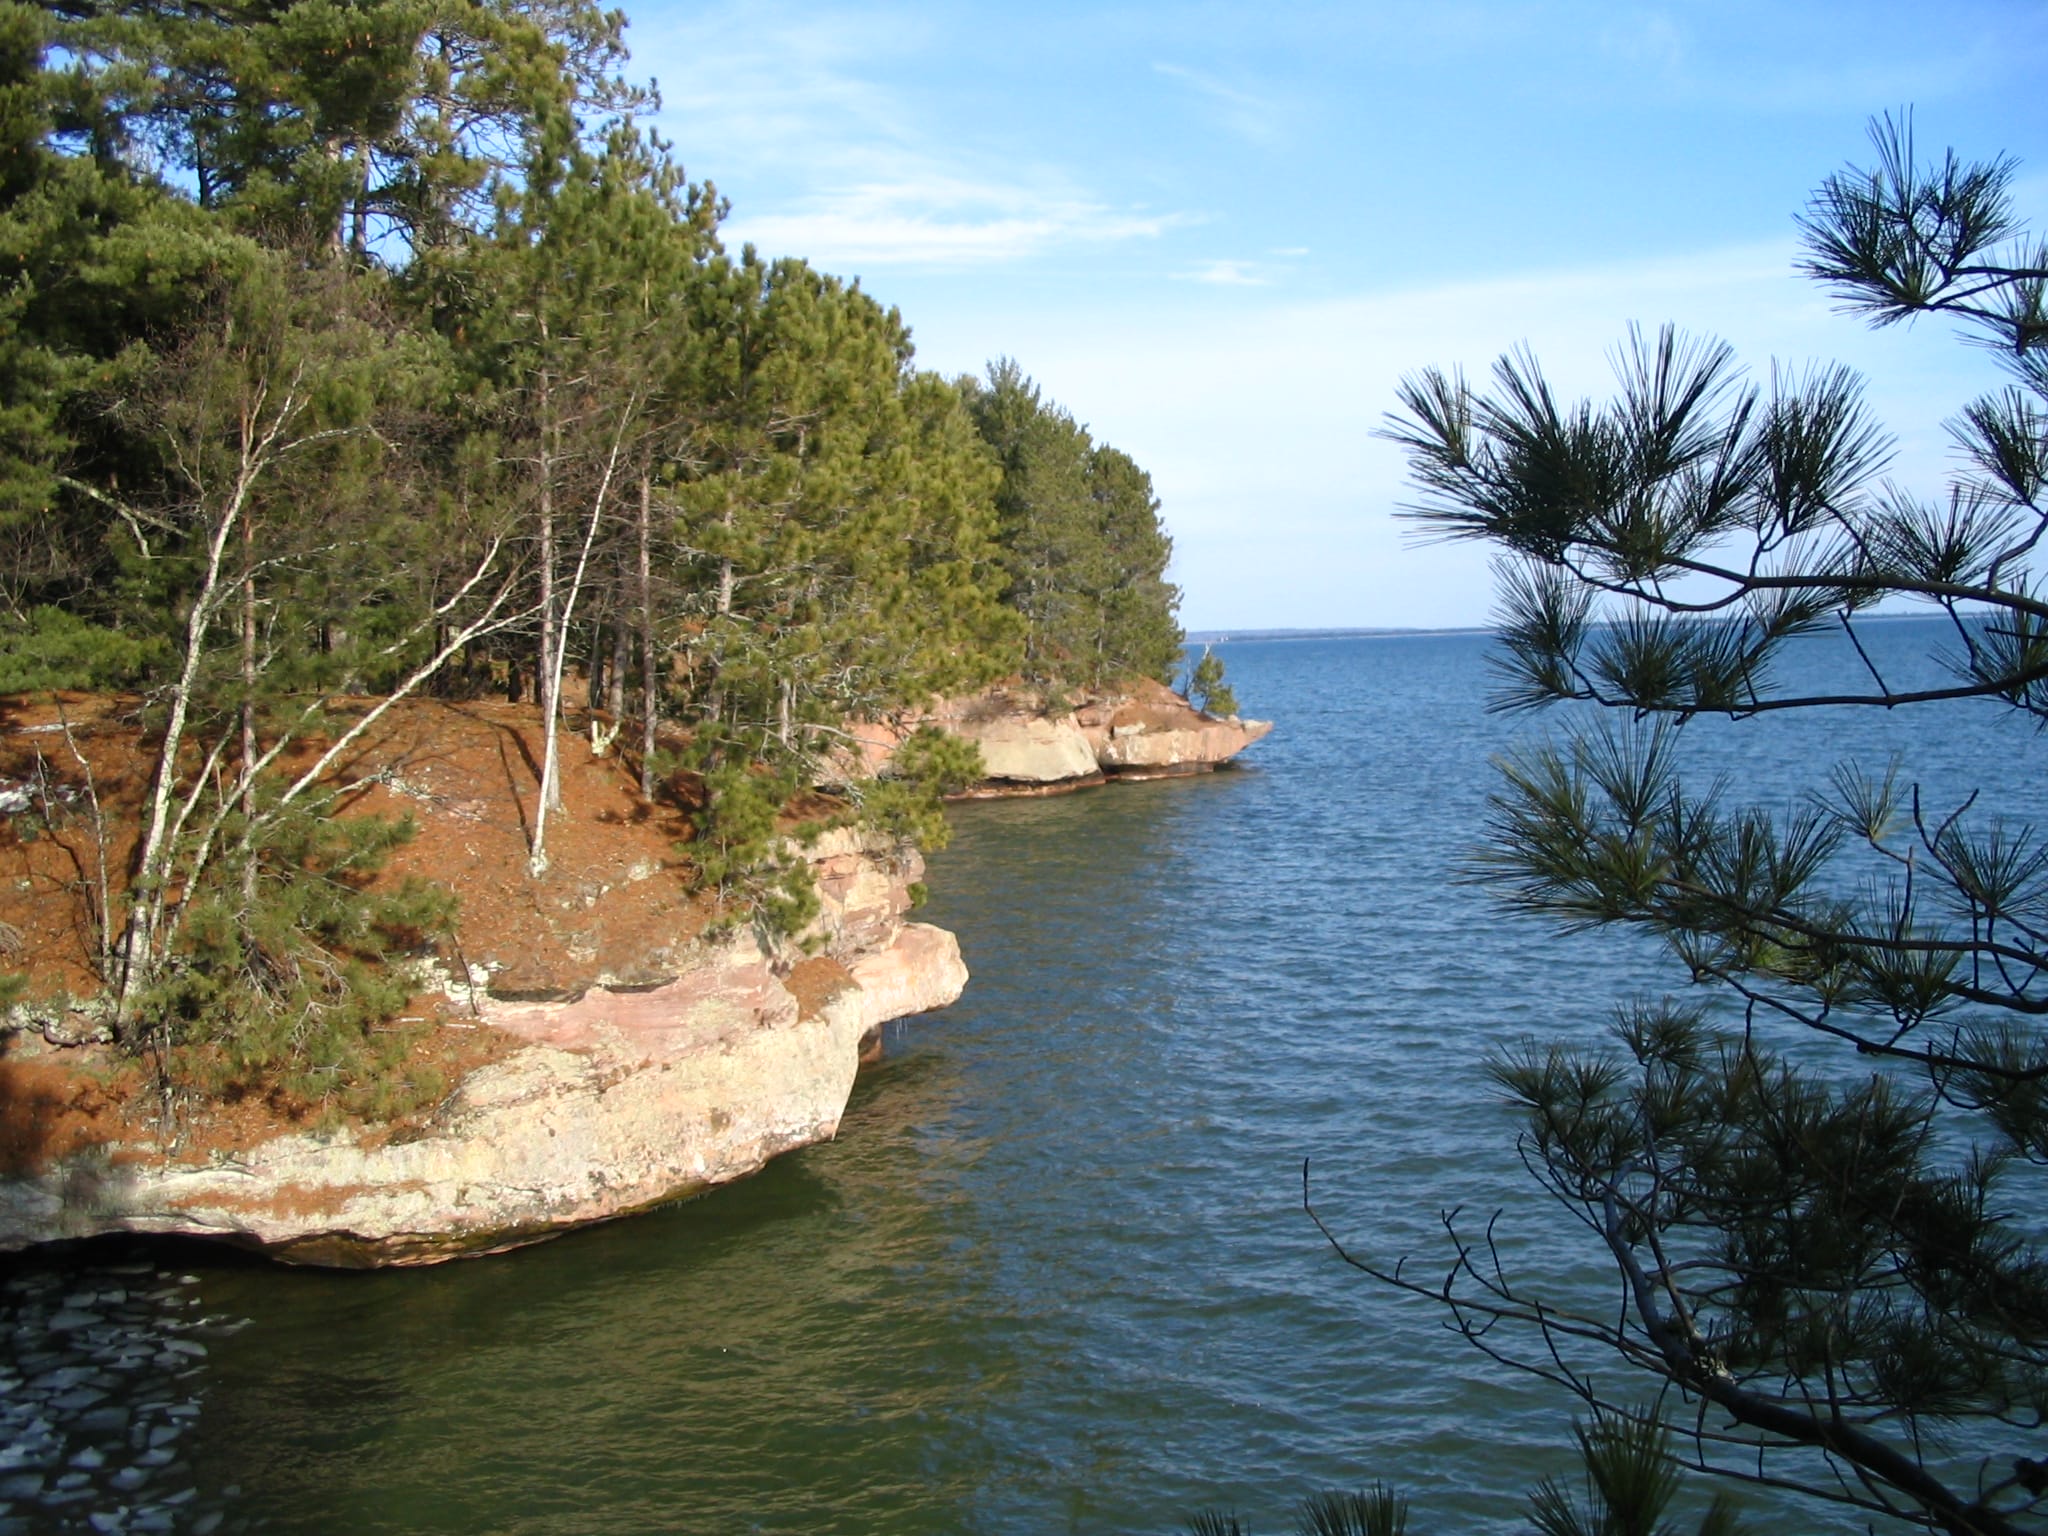 A rocky shoreline with trees and a body of water.